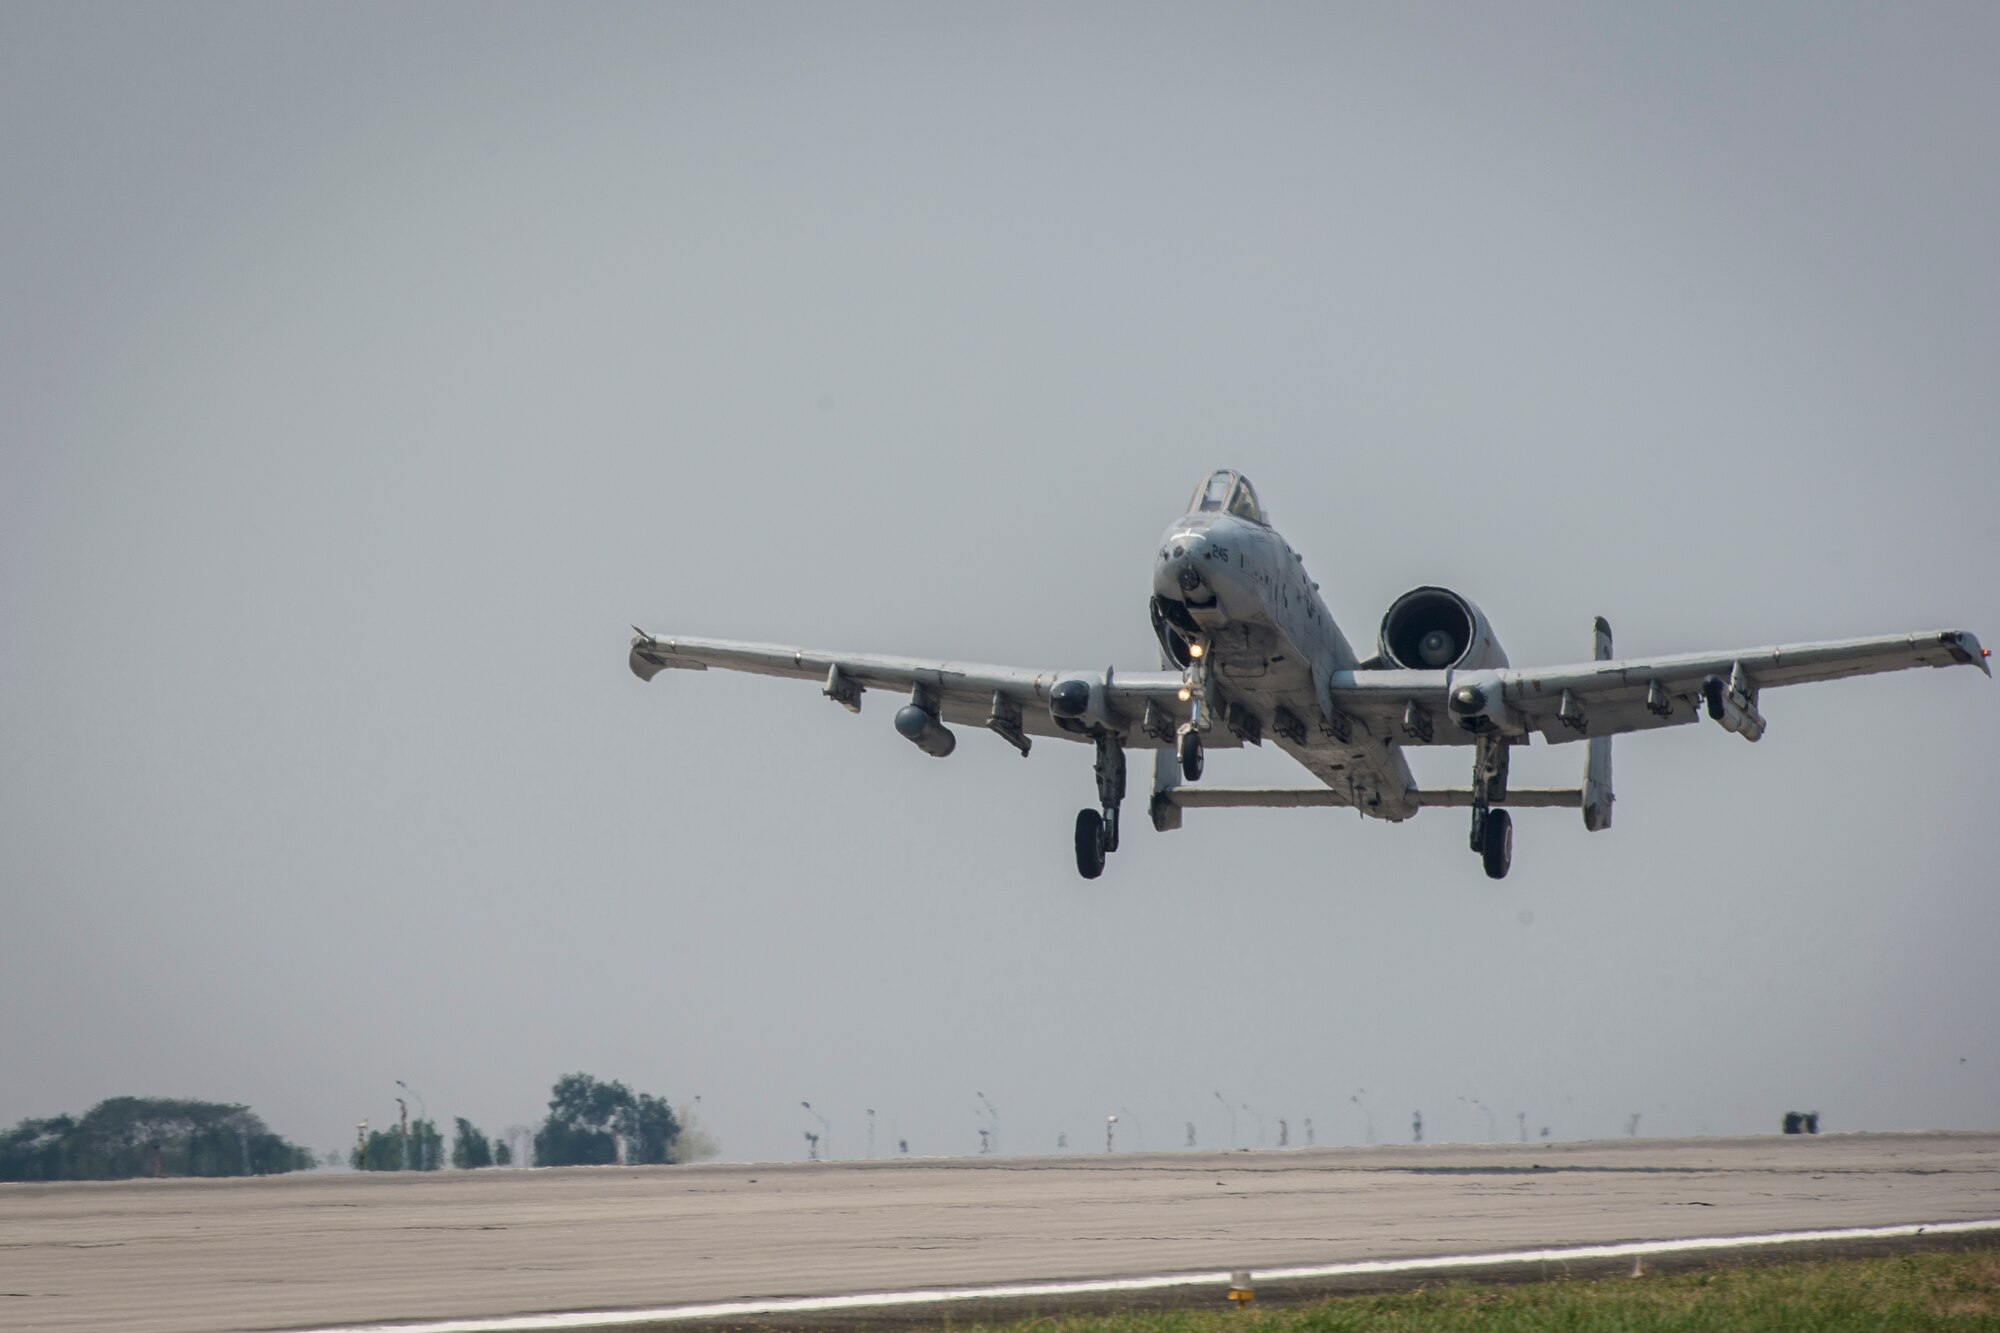 A U.S. Air Force A-10C Thunderbolt II, with the 51st Fighter Wing, Osan Air Base, Republic of Korea, takes off from Clark Air Base, Philippines, April 28, 2016. The A-10Cs flew their last U.S. Pacific Command Air Contingent mission as this iteration comes to a close in the Indo-Asia-Pacific region. The Air Contingent, which was stood up at the invitation of the Philippine government, promotes interoperability and provides greater and more transparent air and maritime situational awareness to ensure safety for military and civilian activities in international waters and airspace. (U.S. Air Force photo by Staff Sgt. Benjamin W. Stratton)